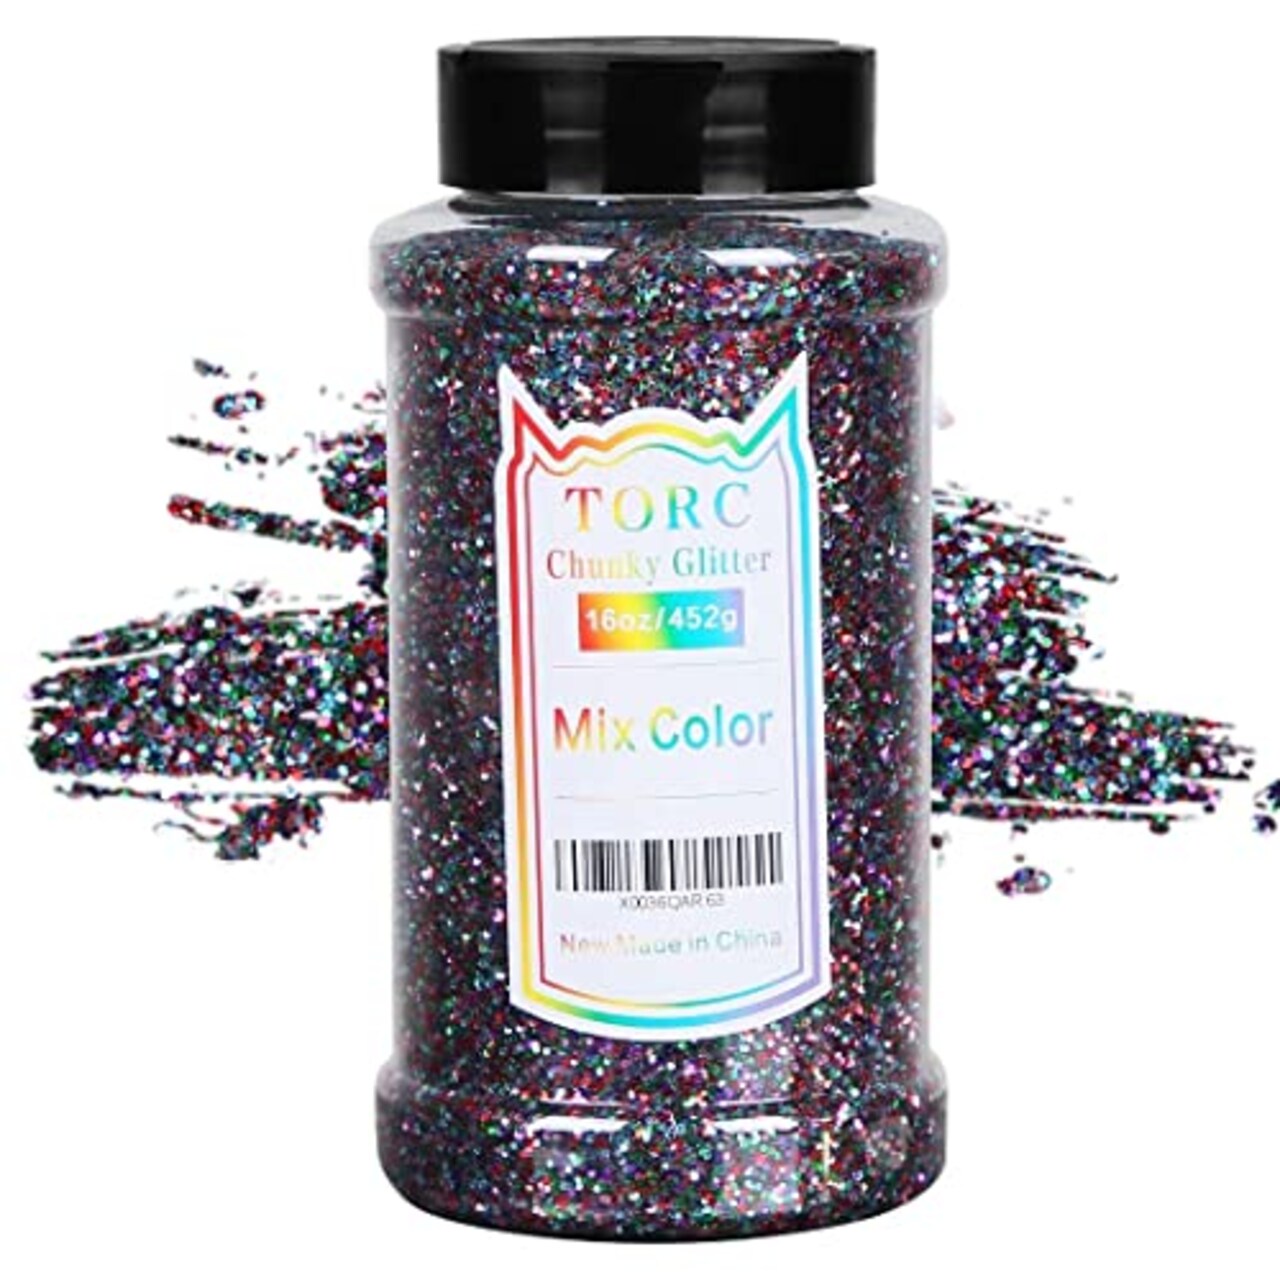 TORC Mix Colors Chunky Glitter 1 Pound 16 OZ Glitter for Resin